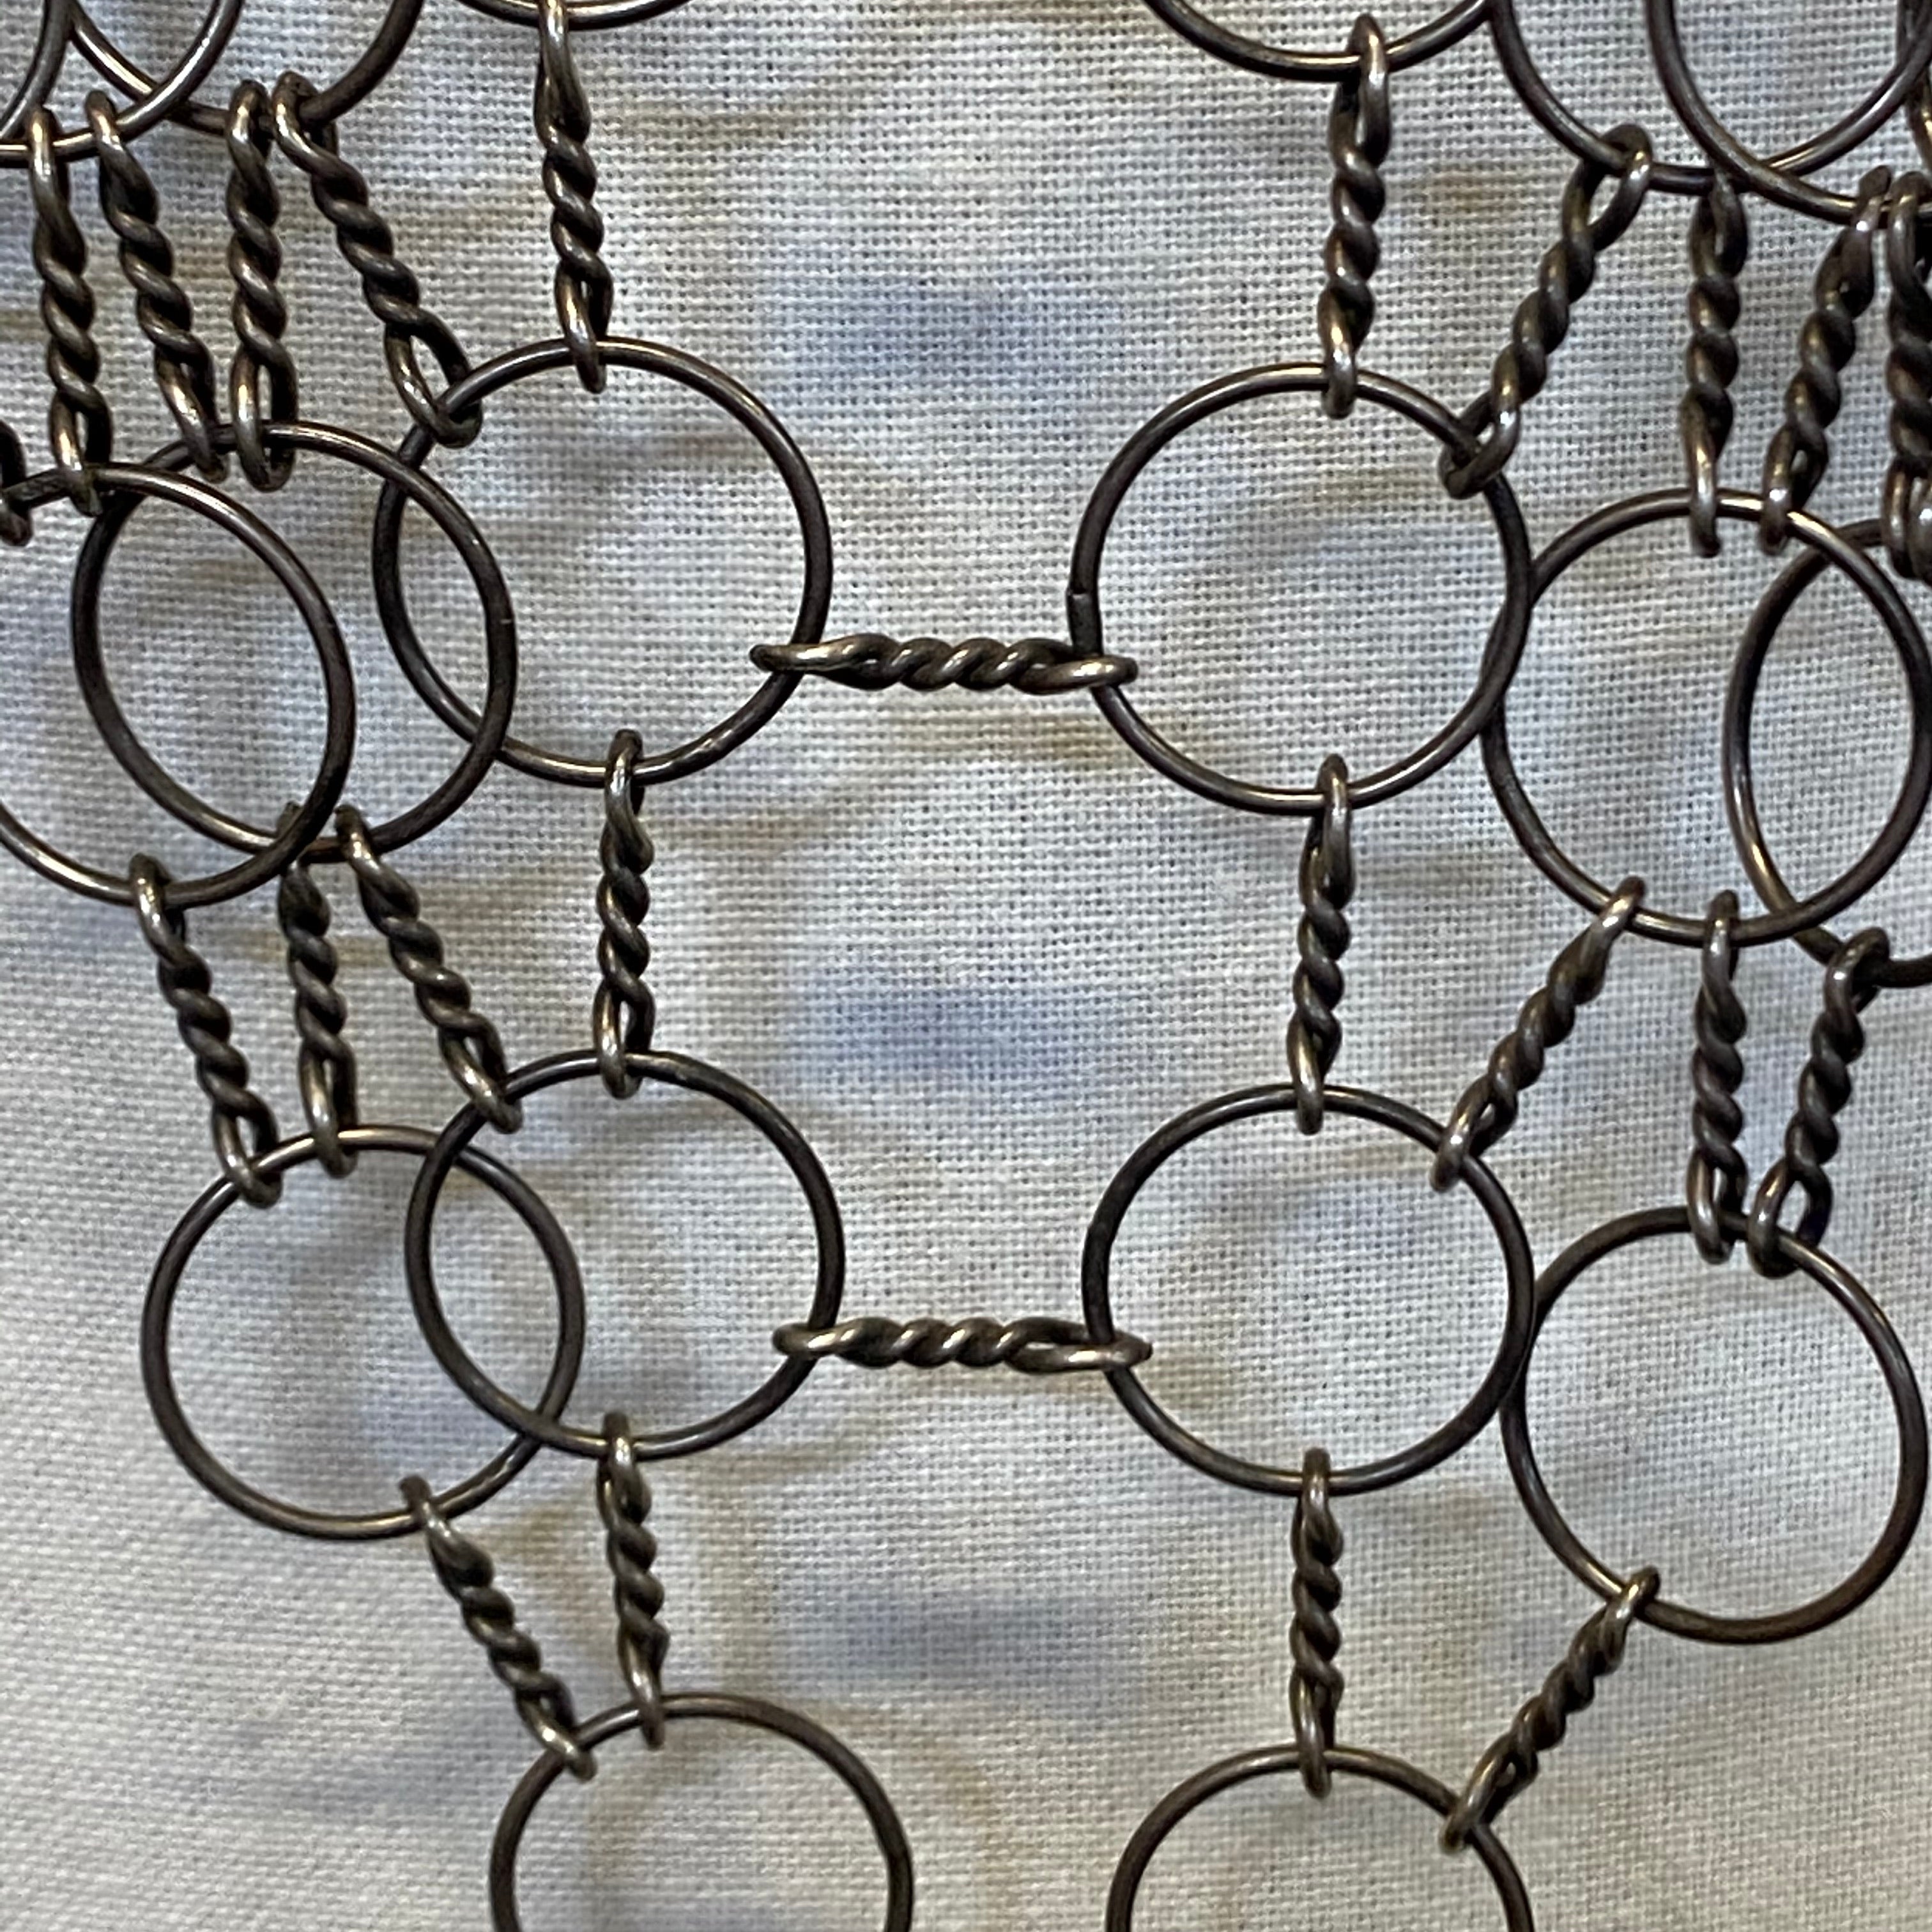 ANN DEMULEMEESTER sterling silver necklace